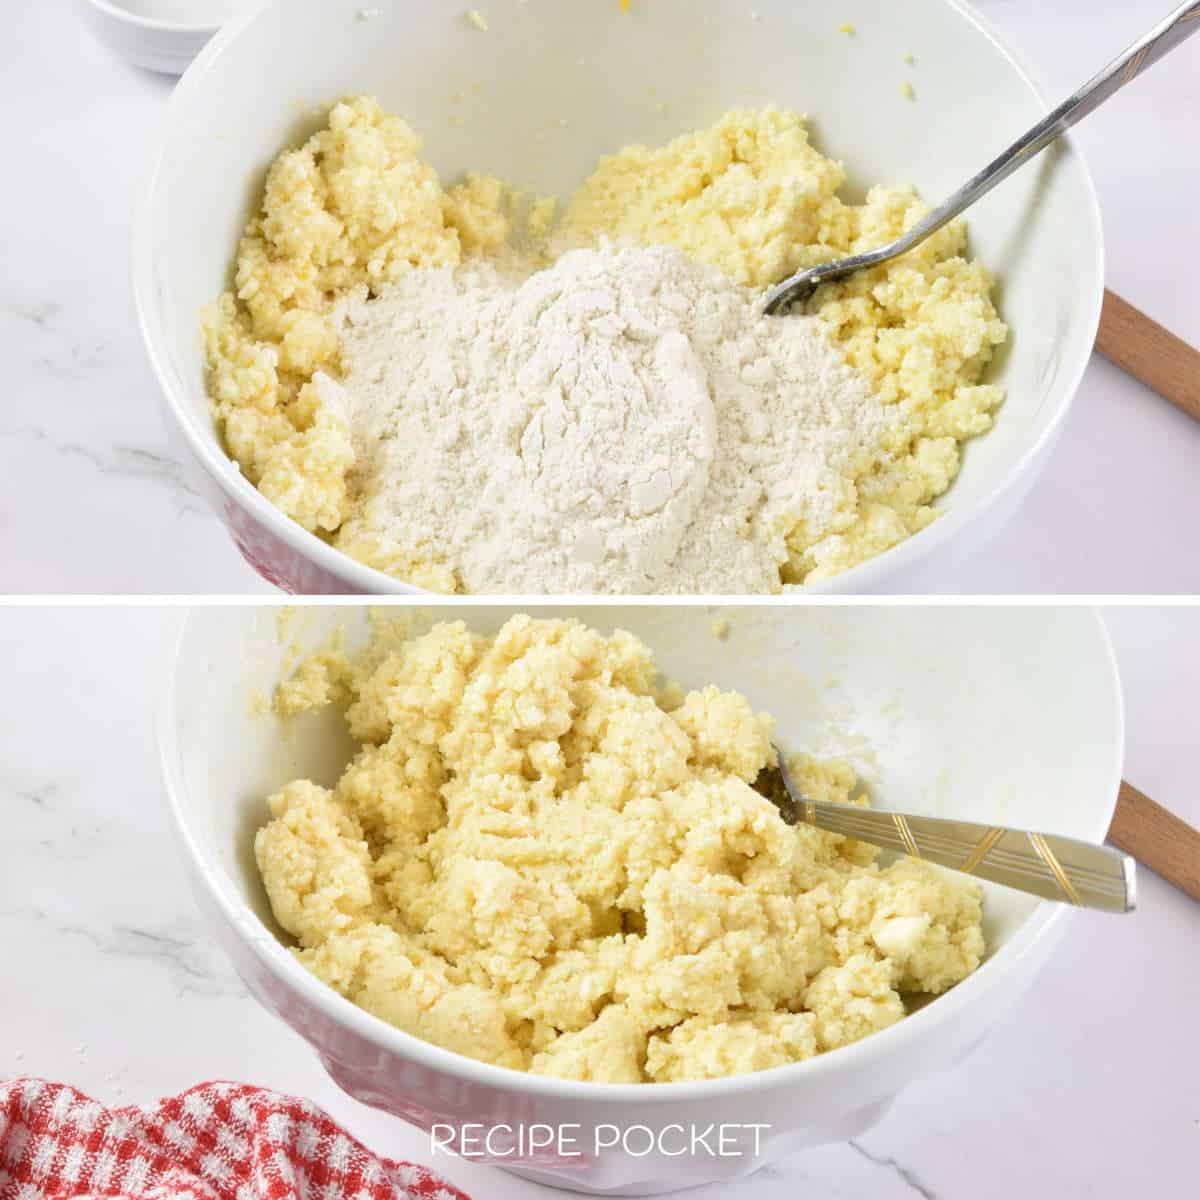 Ricotta mixture and flour in a bowl.